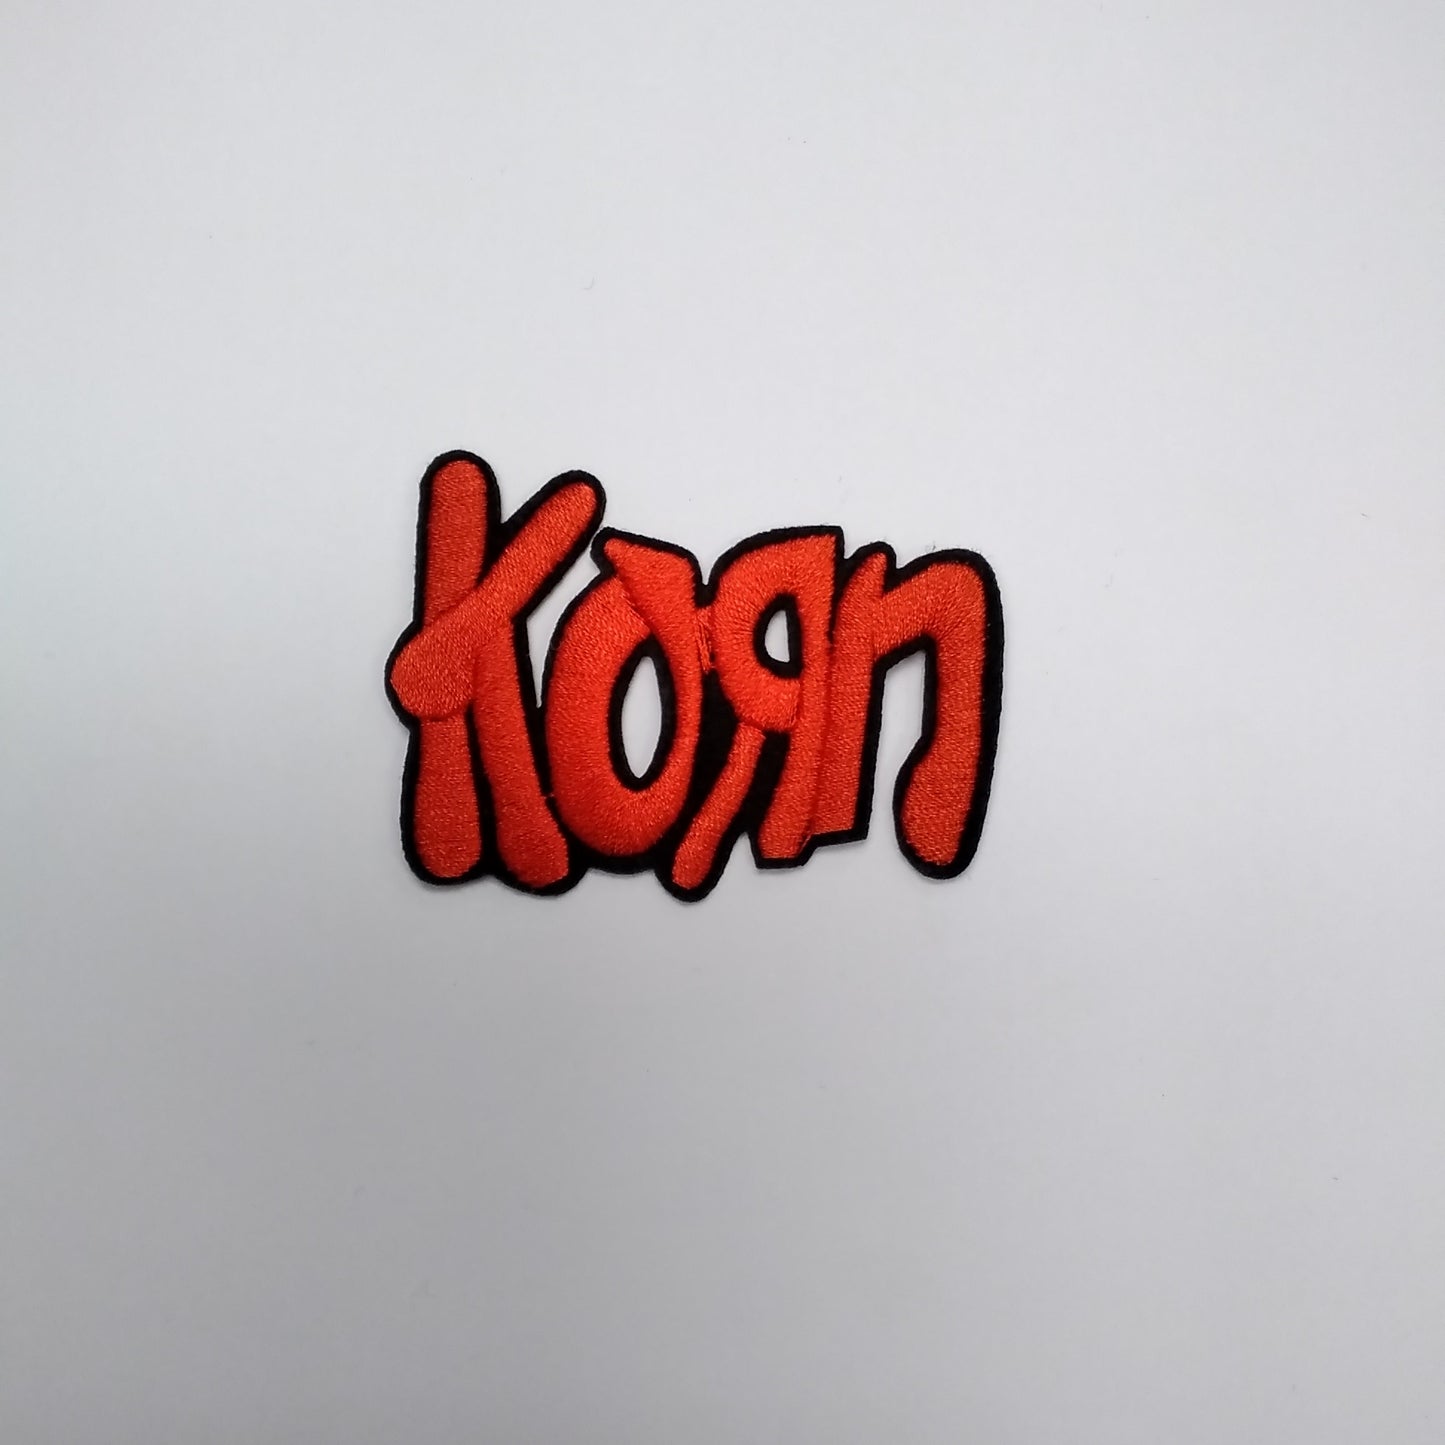 Korn patches